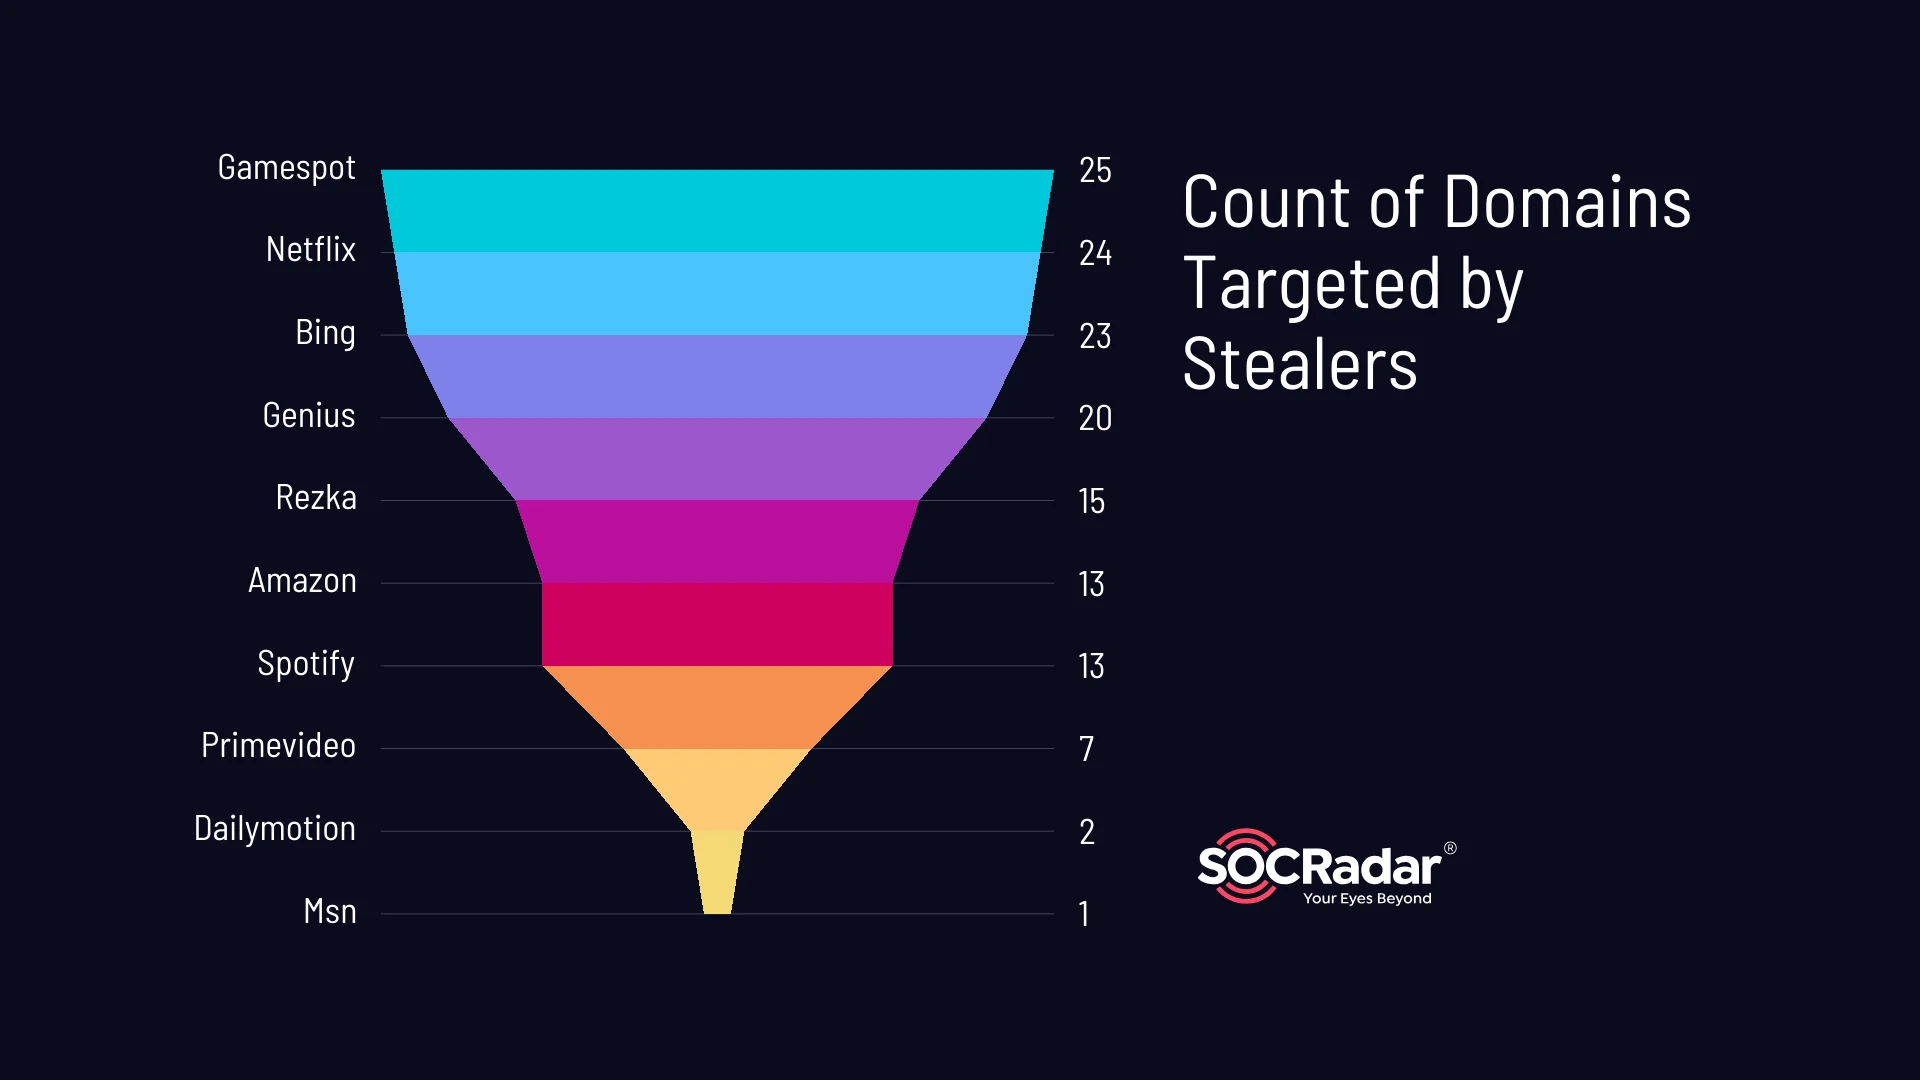 Count of related domains targeted by stealers